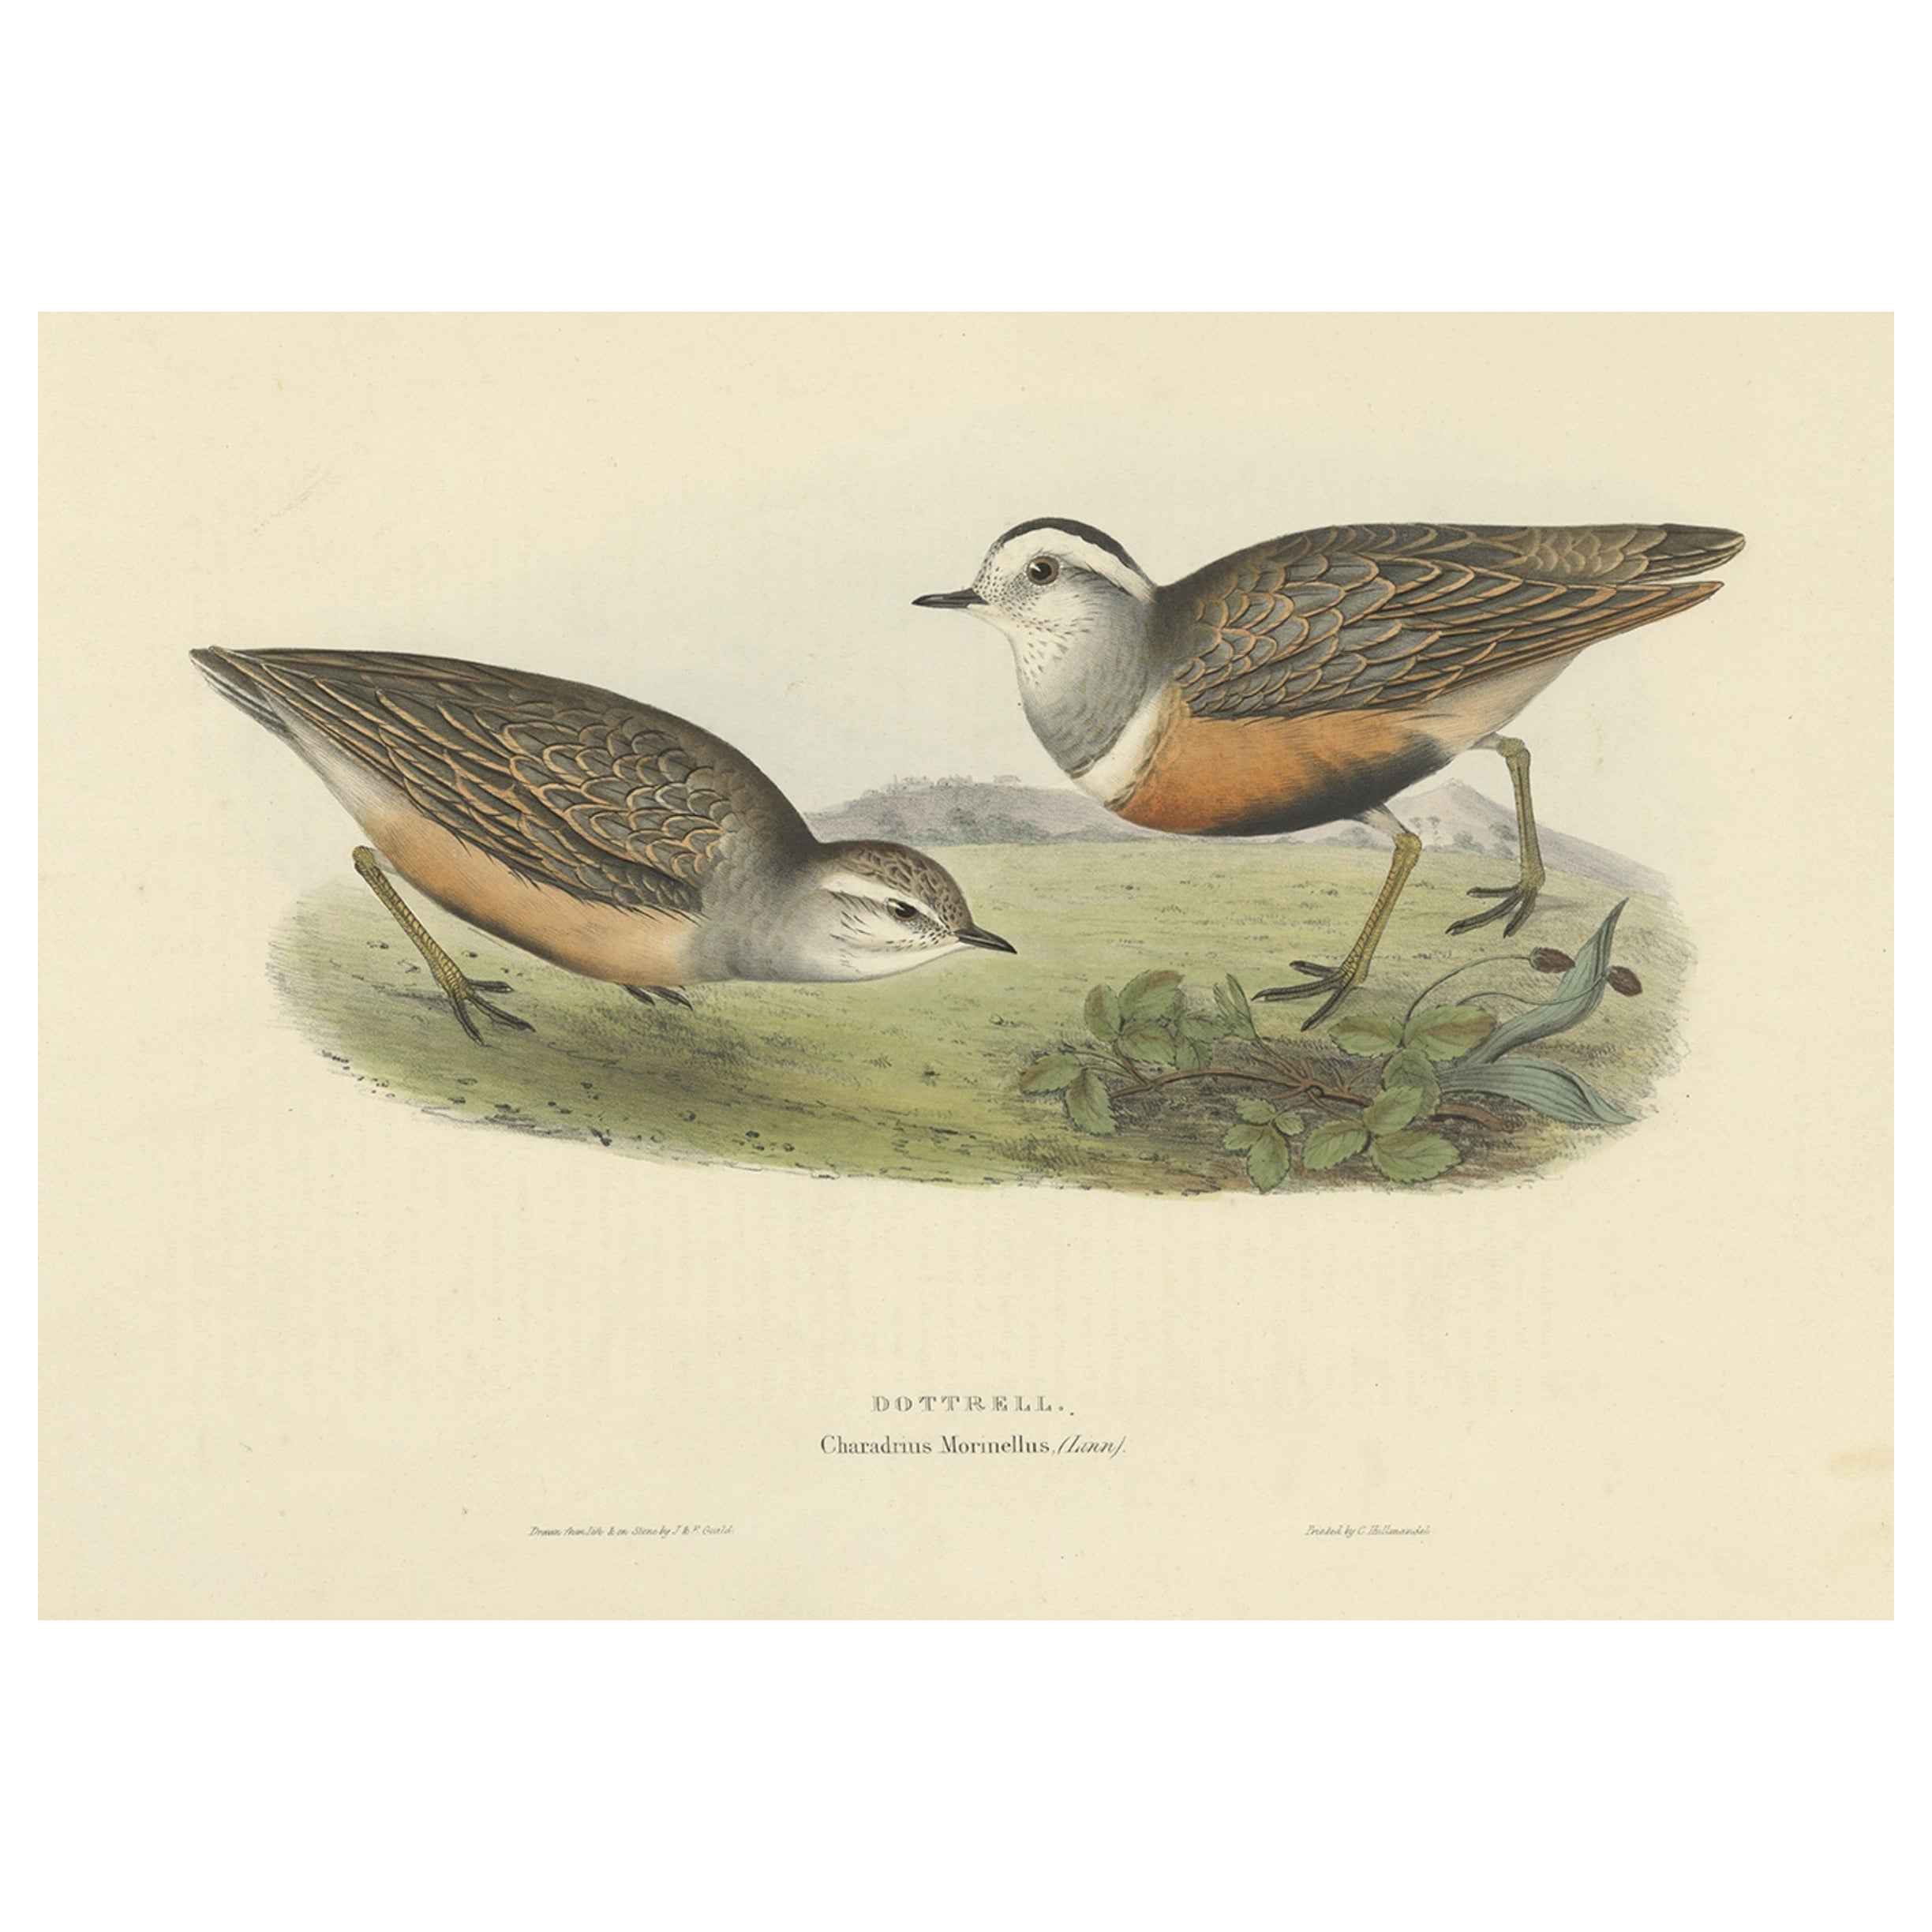 Old Bird Print Depicting the Dotterel Bird by Gould, 1832